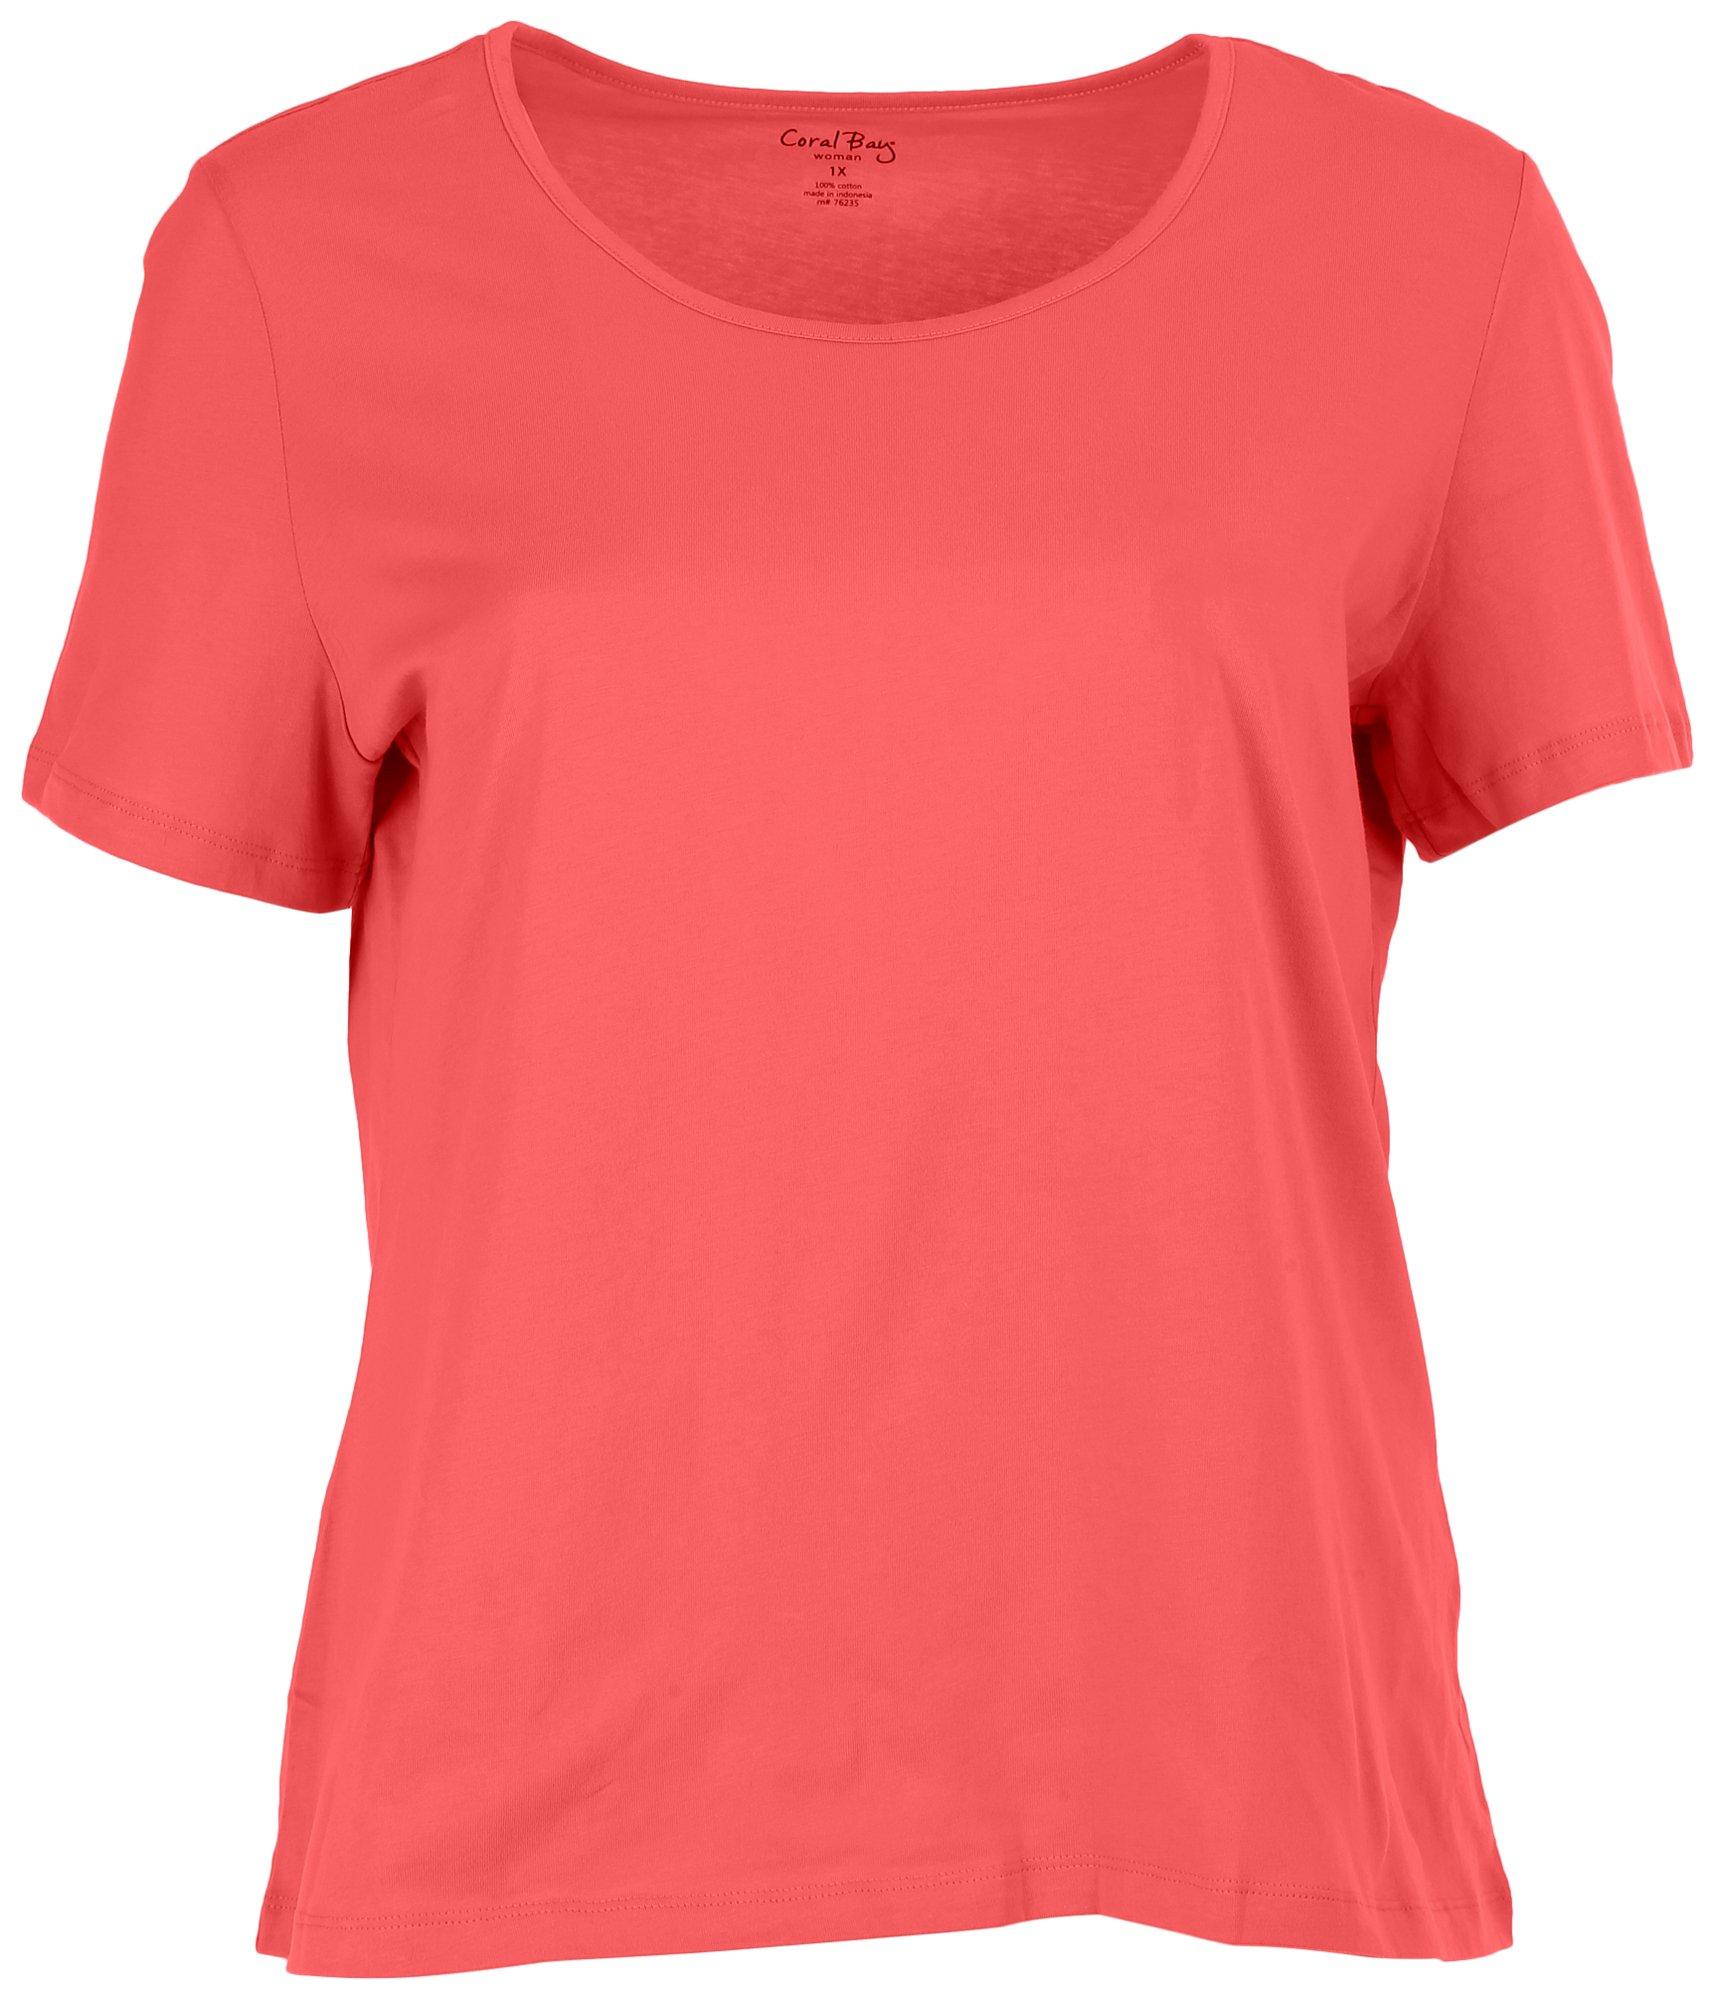 Coral Bay Plus Solid Jewel Band Short Sleeve Top